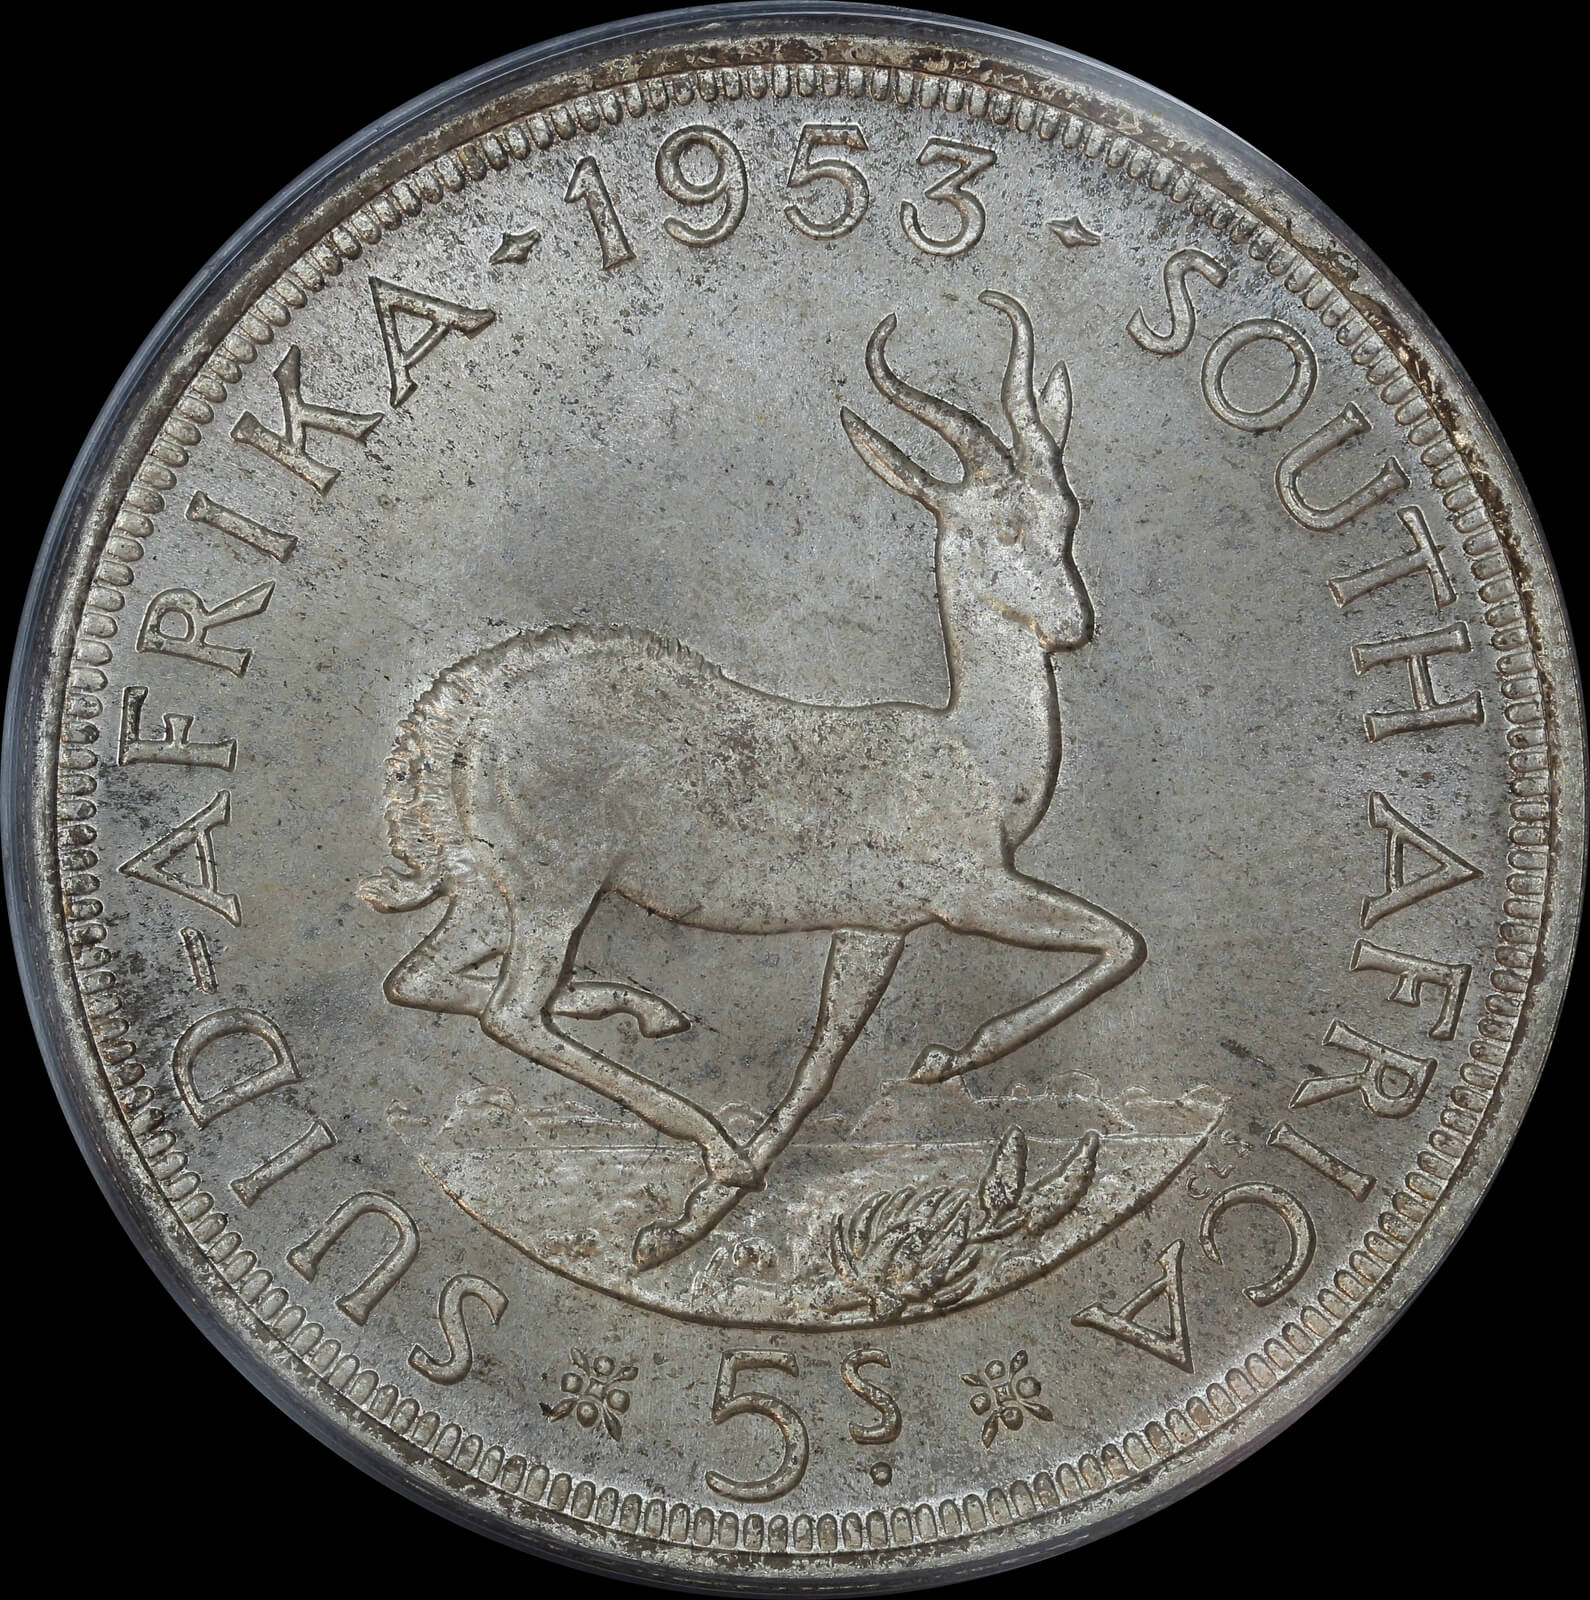 South Africa 1953 Silver Prooflike 5 Shillings KM#52 PCGS PL65 product image